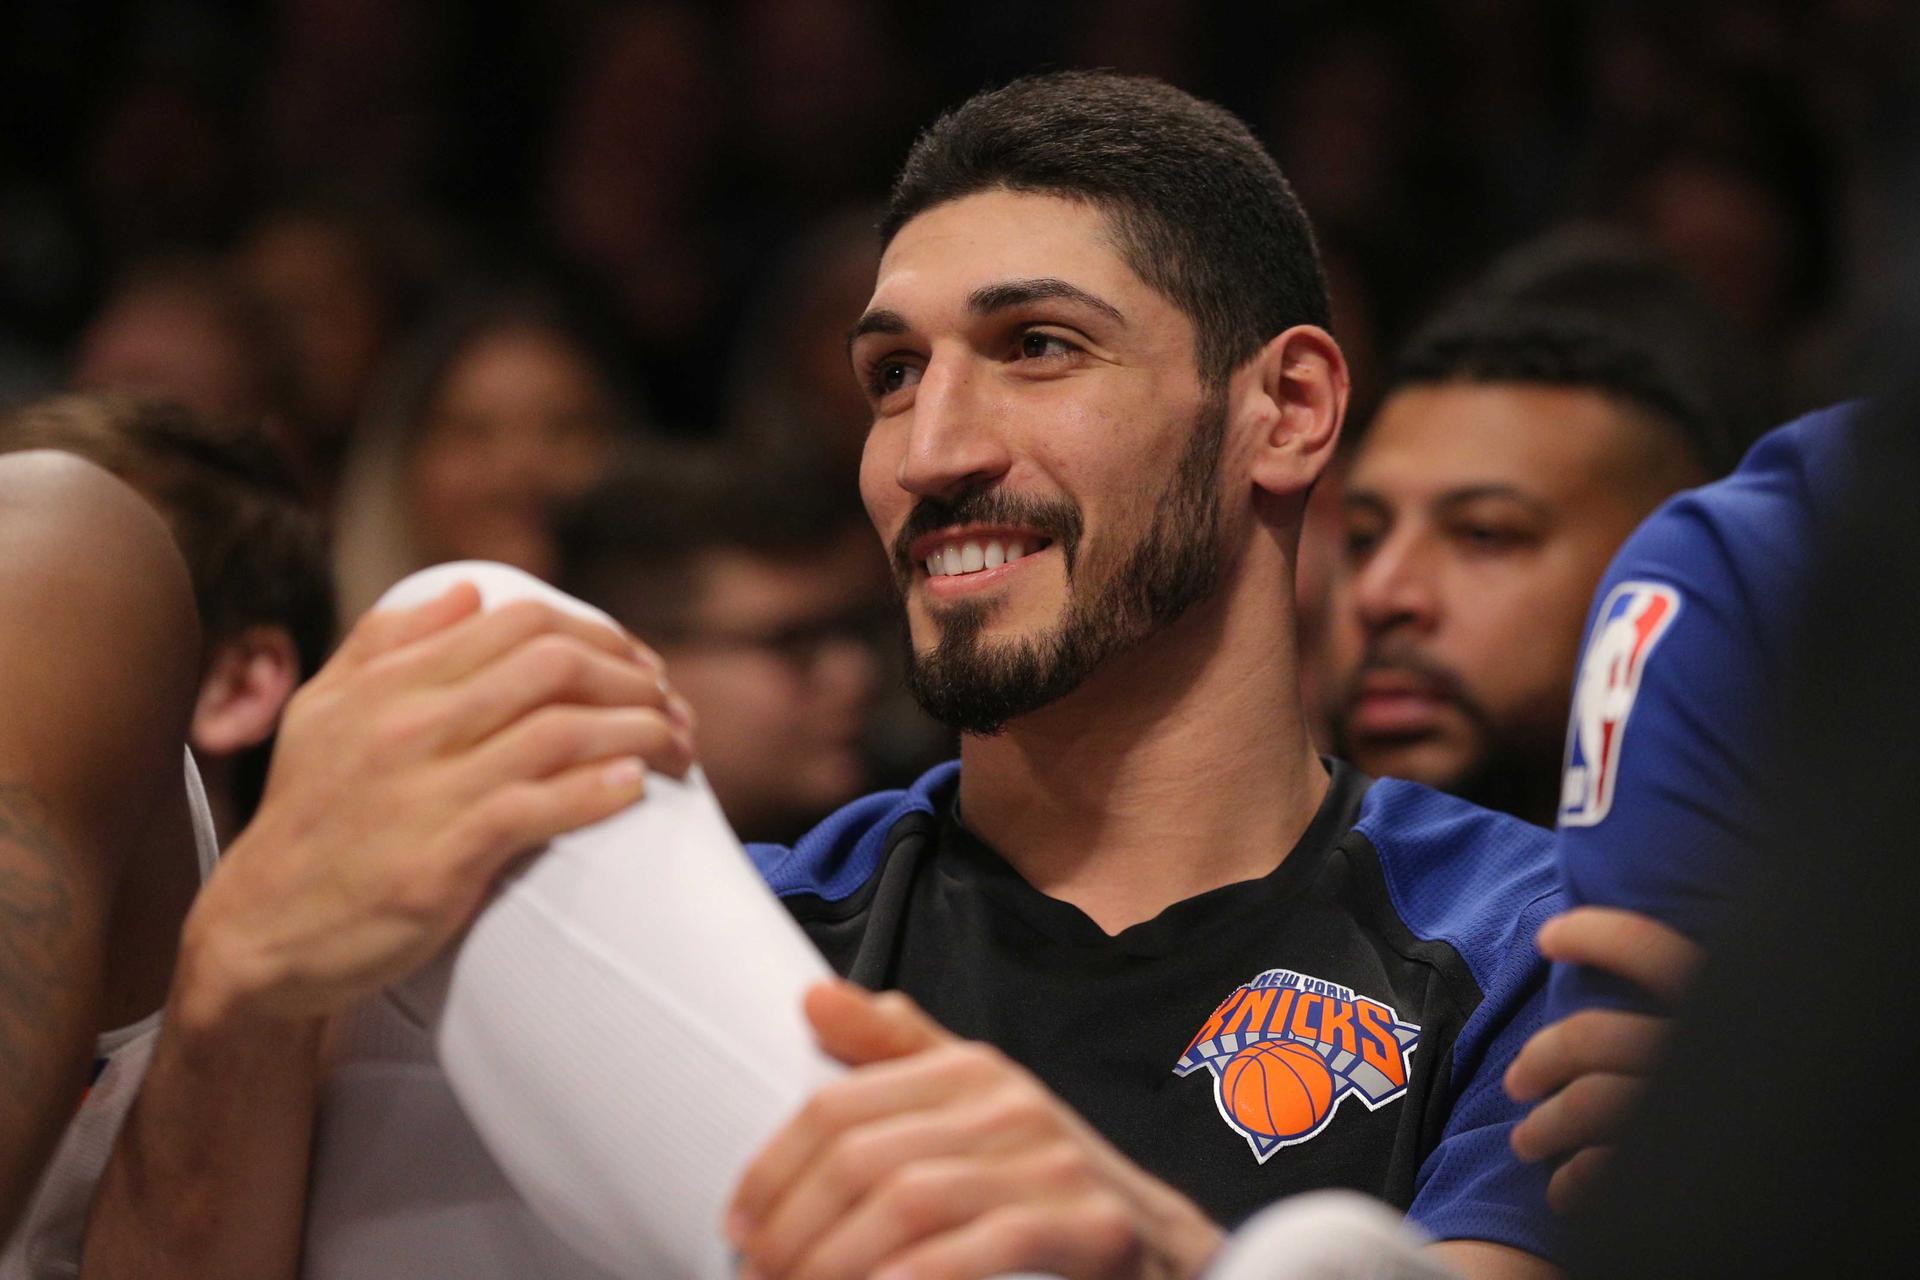 A close up of Enes Kanter's face as he looks to the left